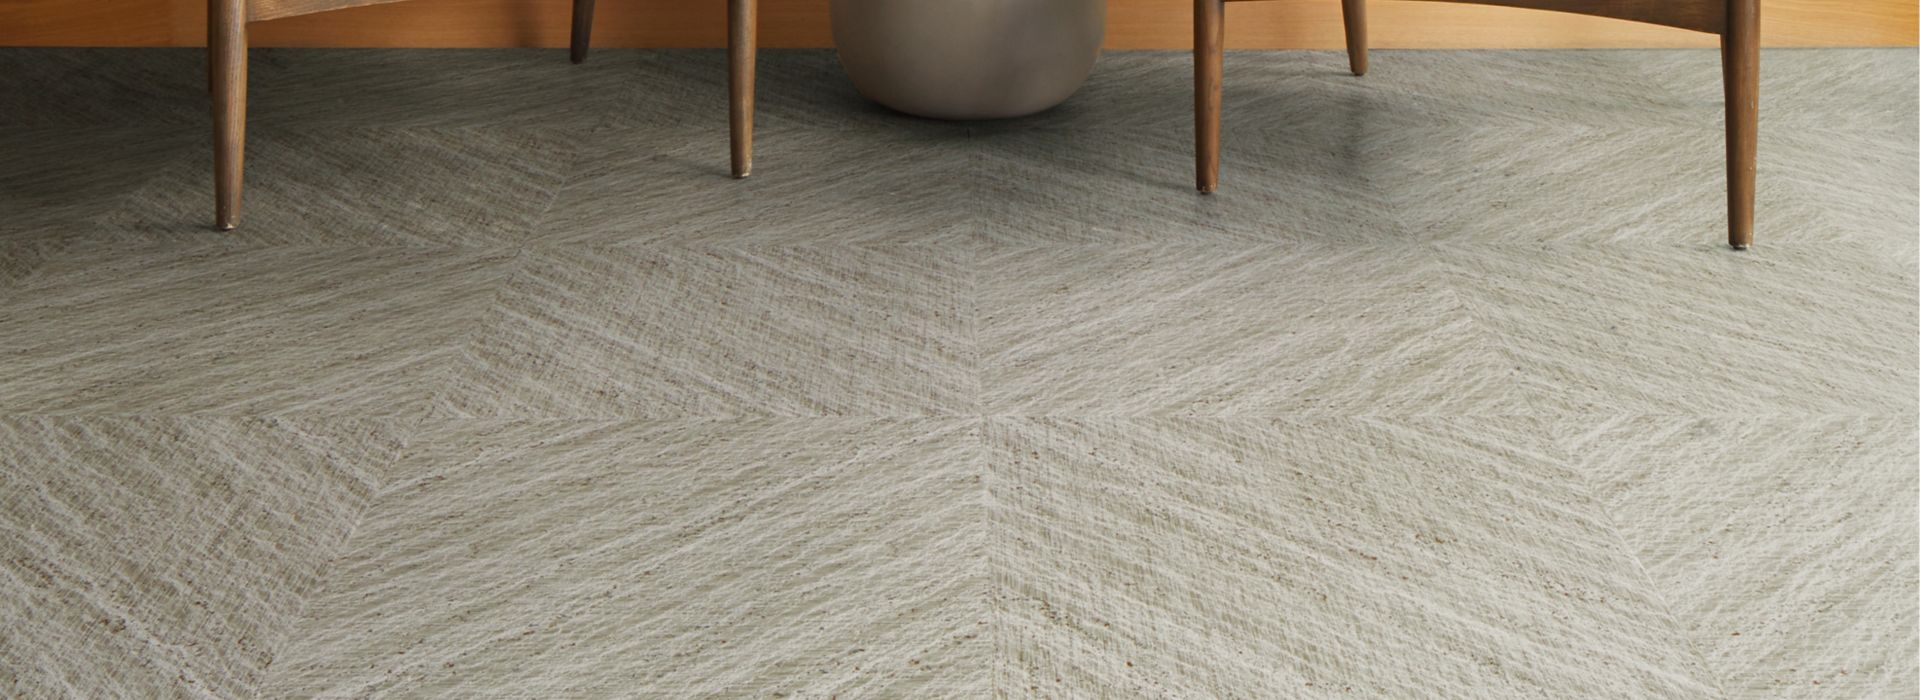 Interface Ridge LVT in Agate shown in a casual seating area